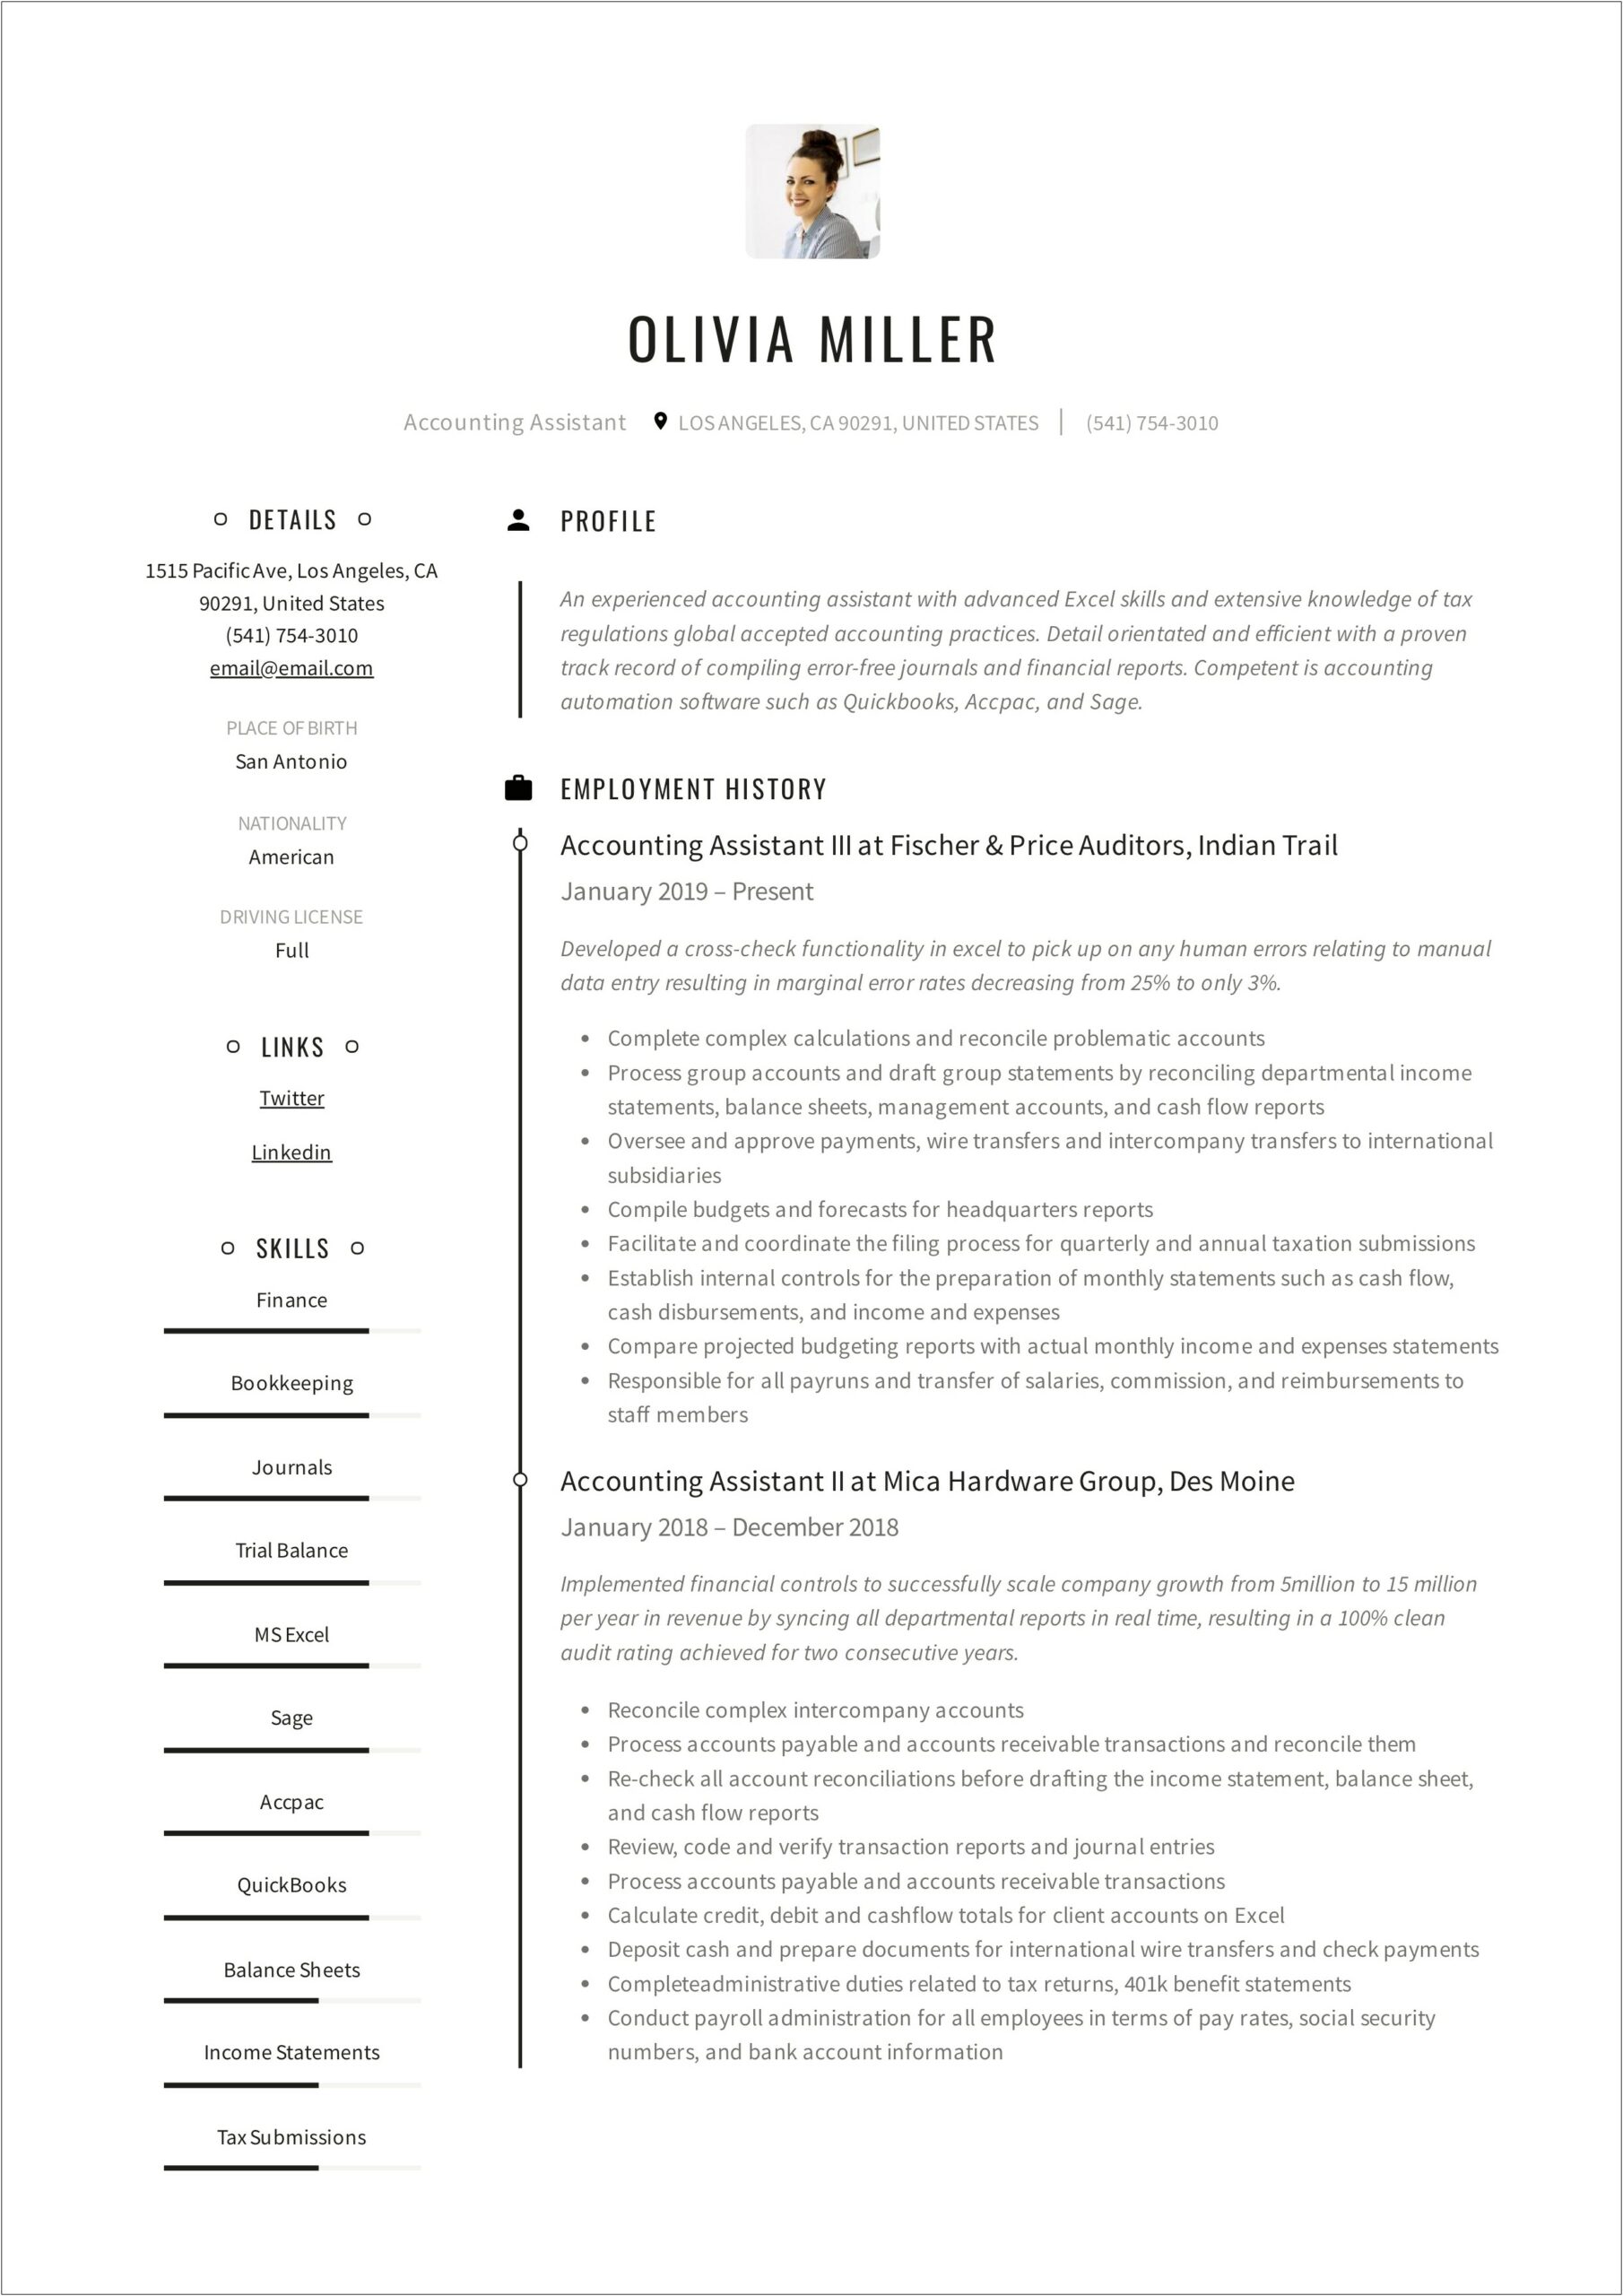 Sample Resume Format For Accounting Assistant